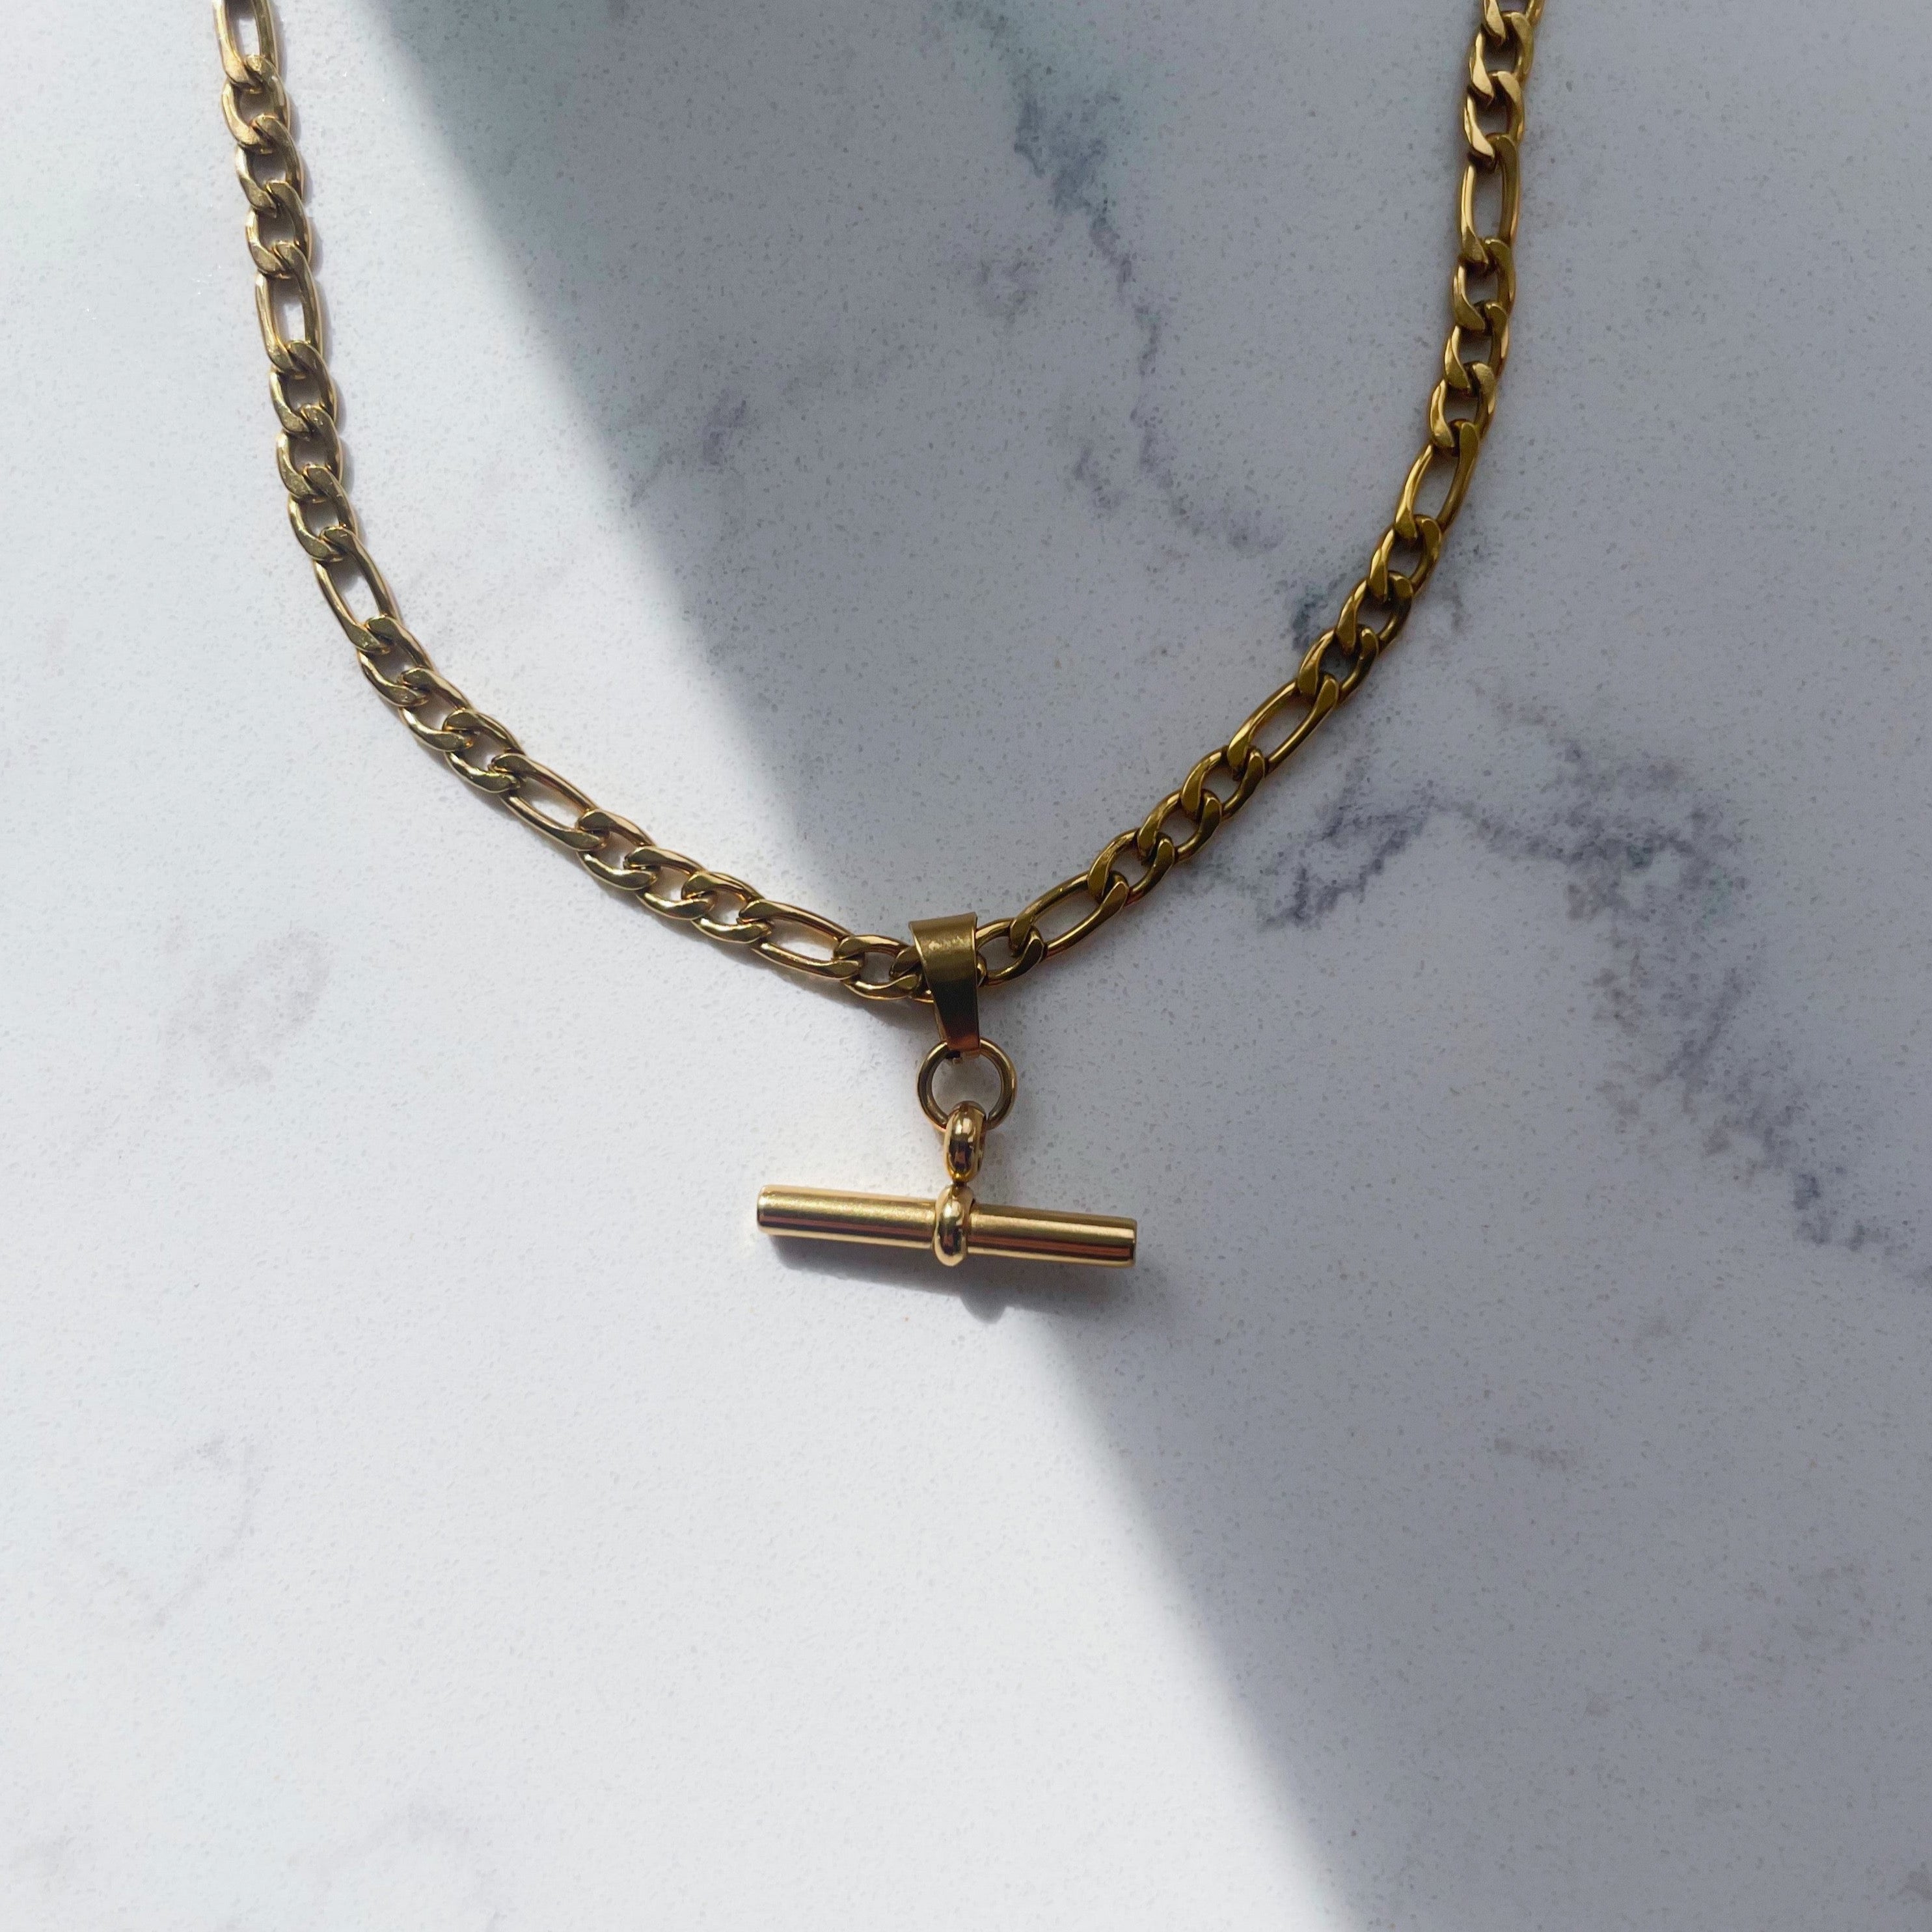 T-Bar Necklace for Women: Make a Statement with this Elegant Gold Pendant